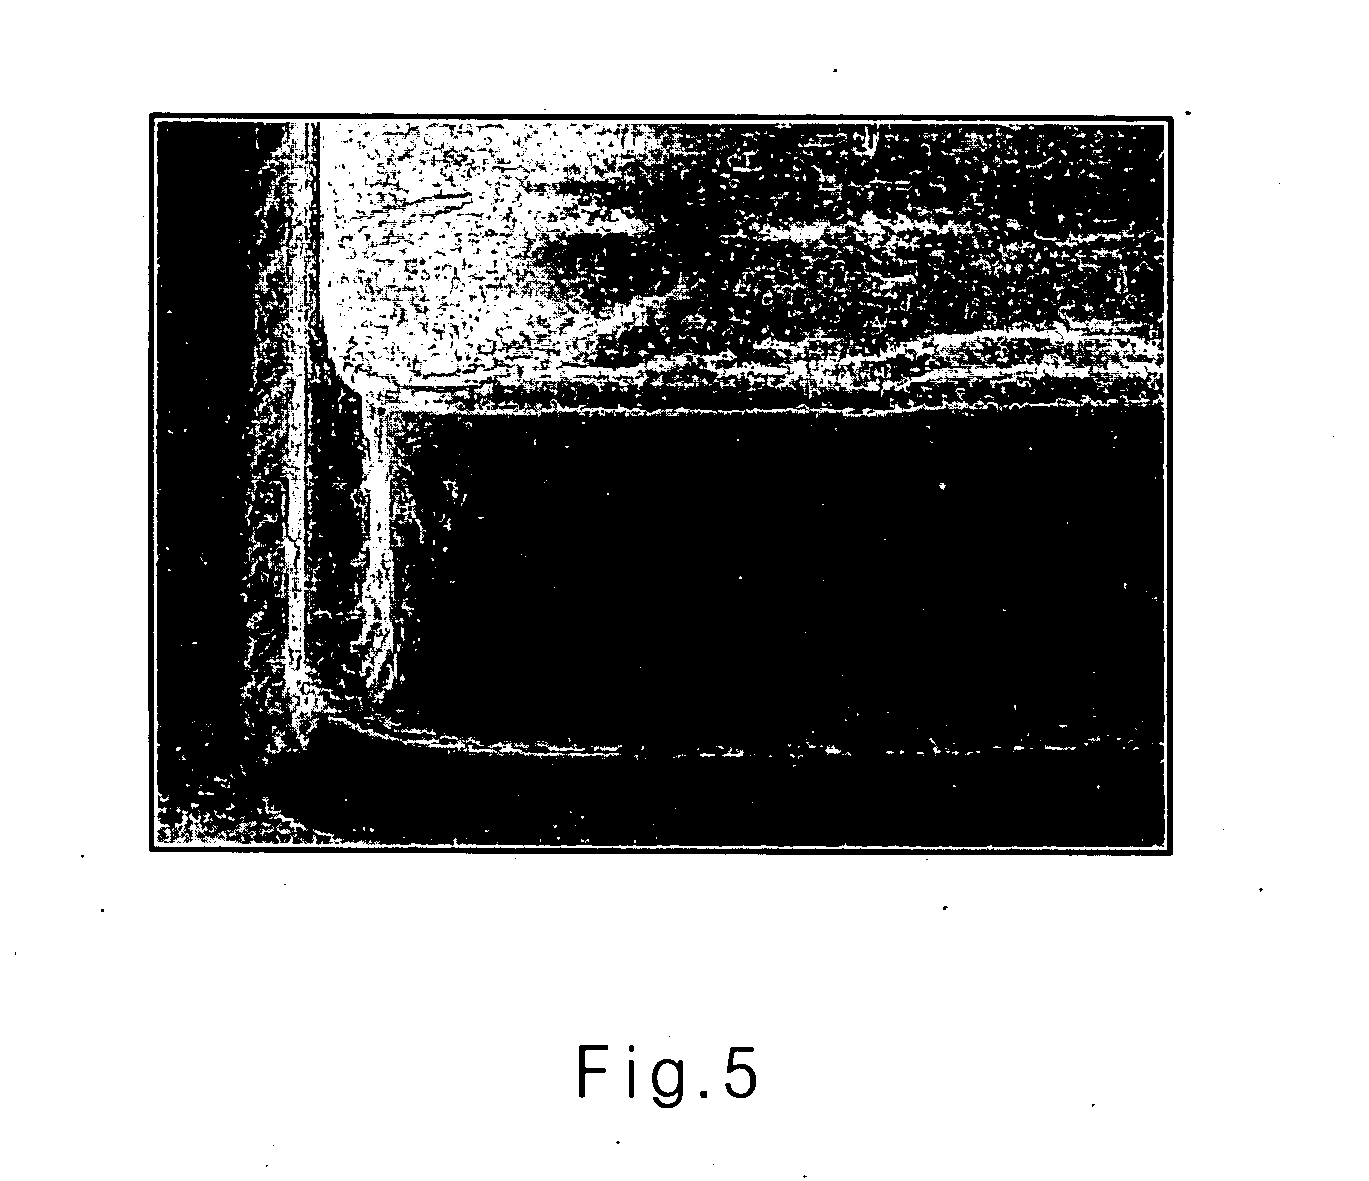 Photoresist removing compositions